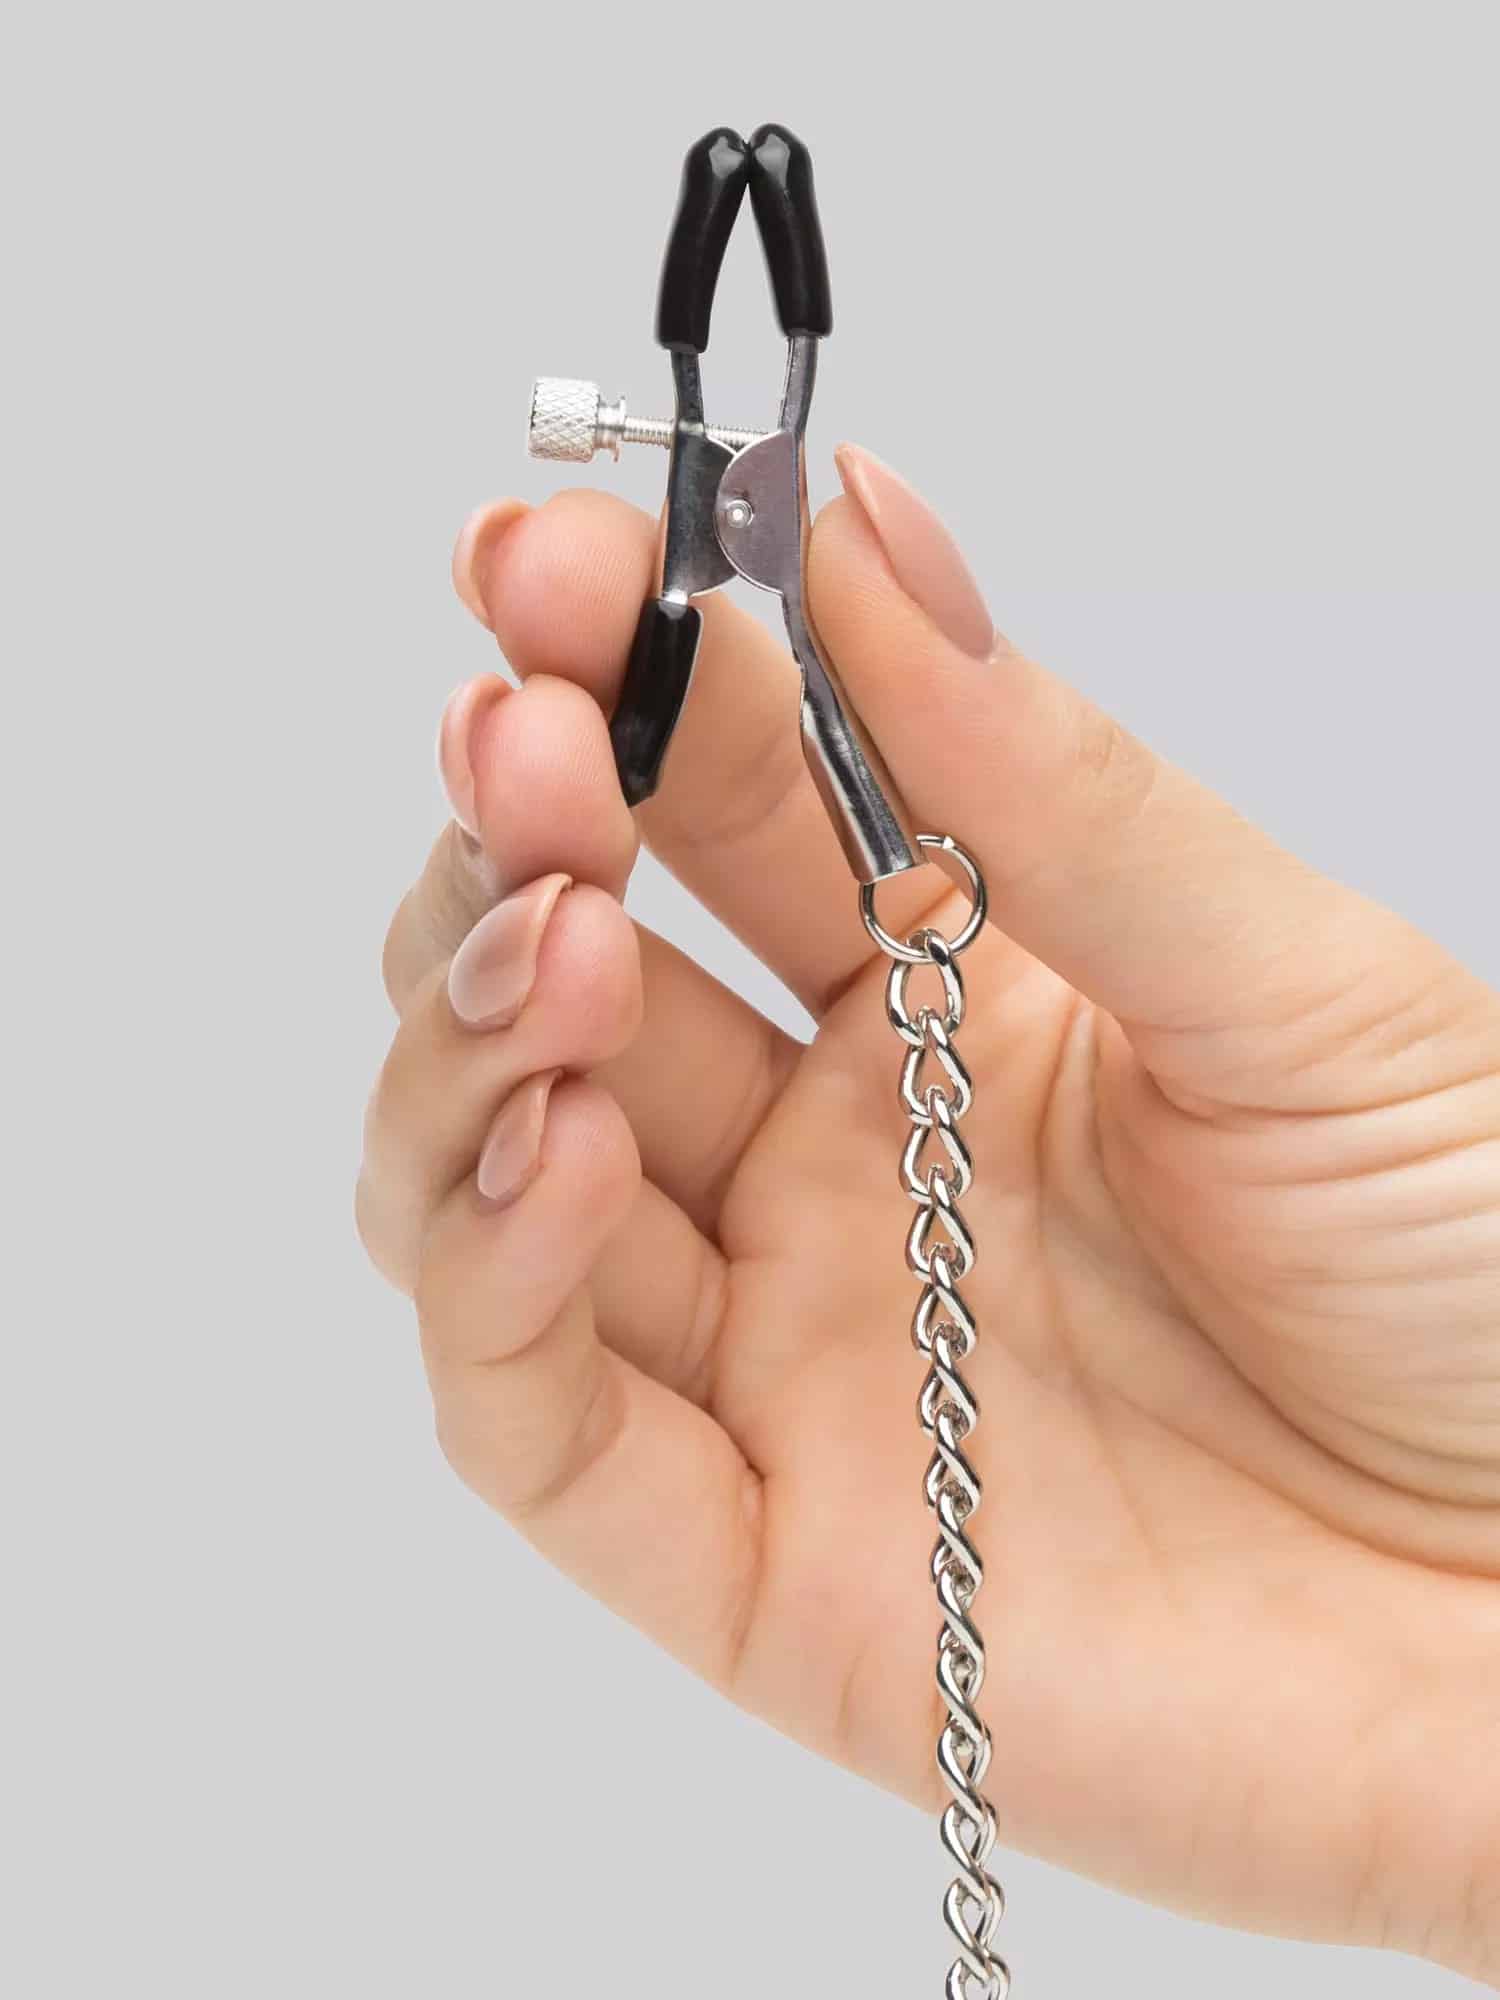 Bondage Boutique Adjustable Nipple Clamps and Clit Clamp. Slide 4